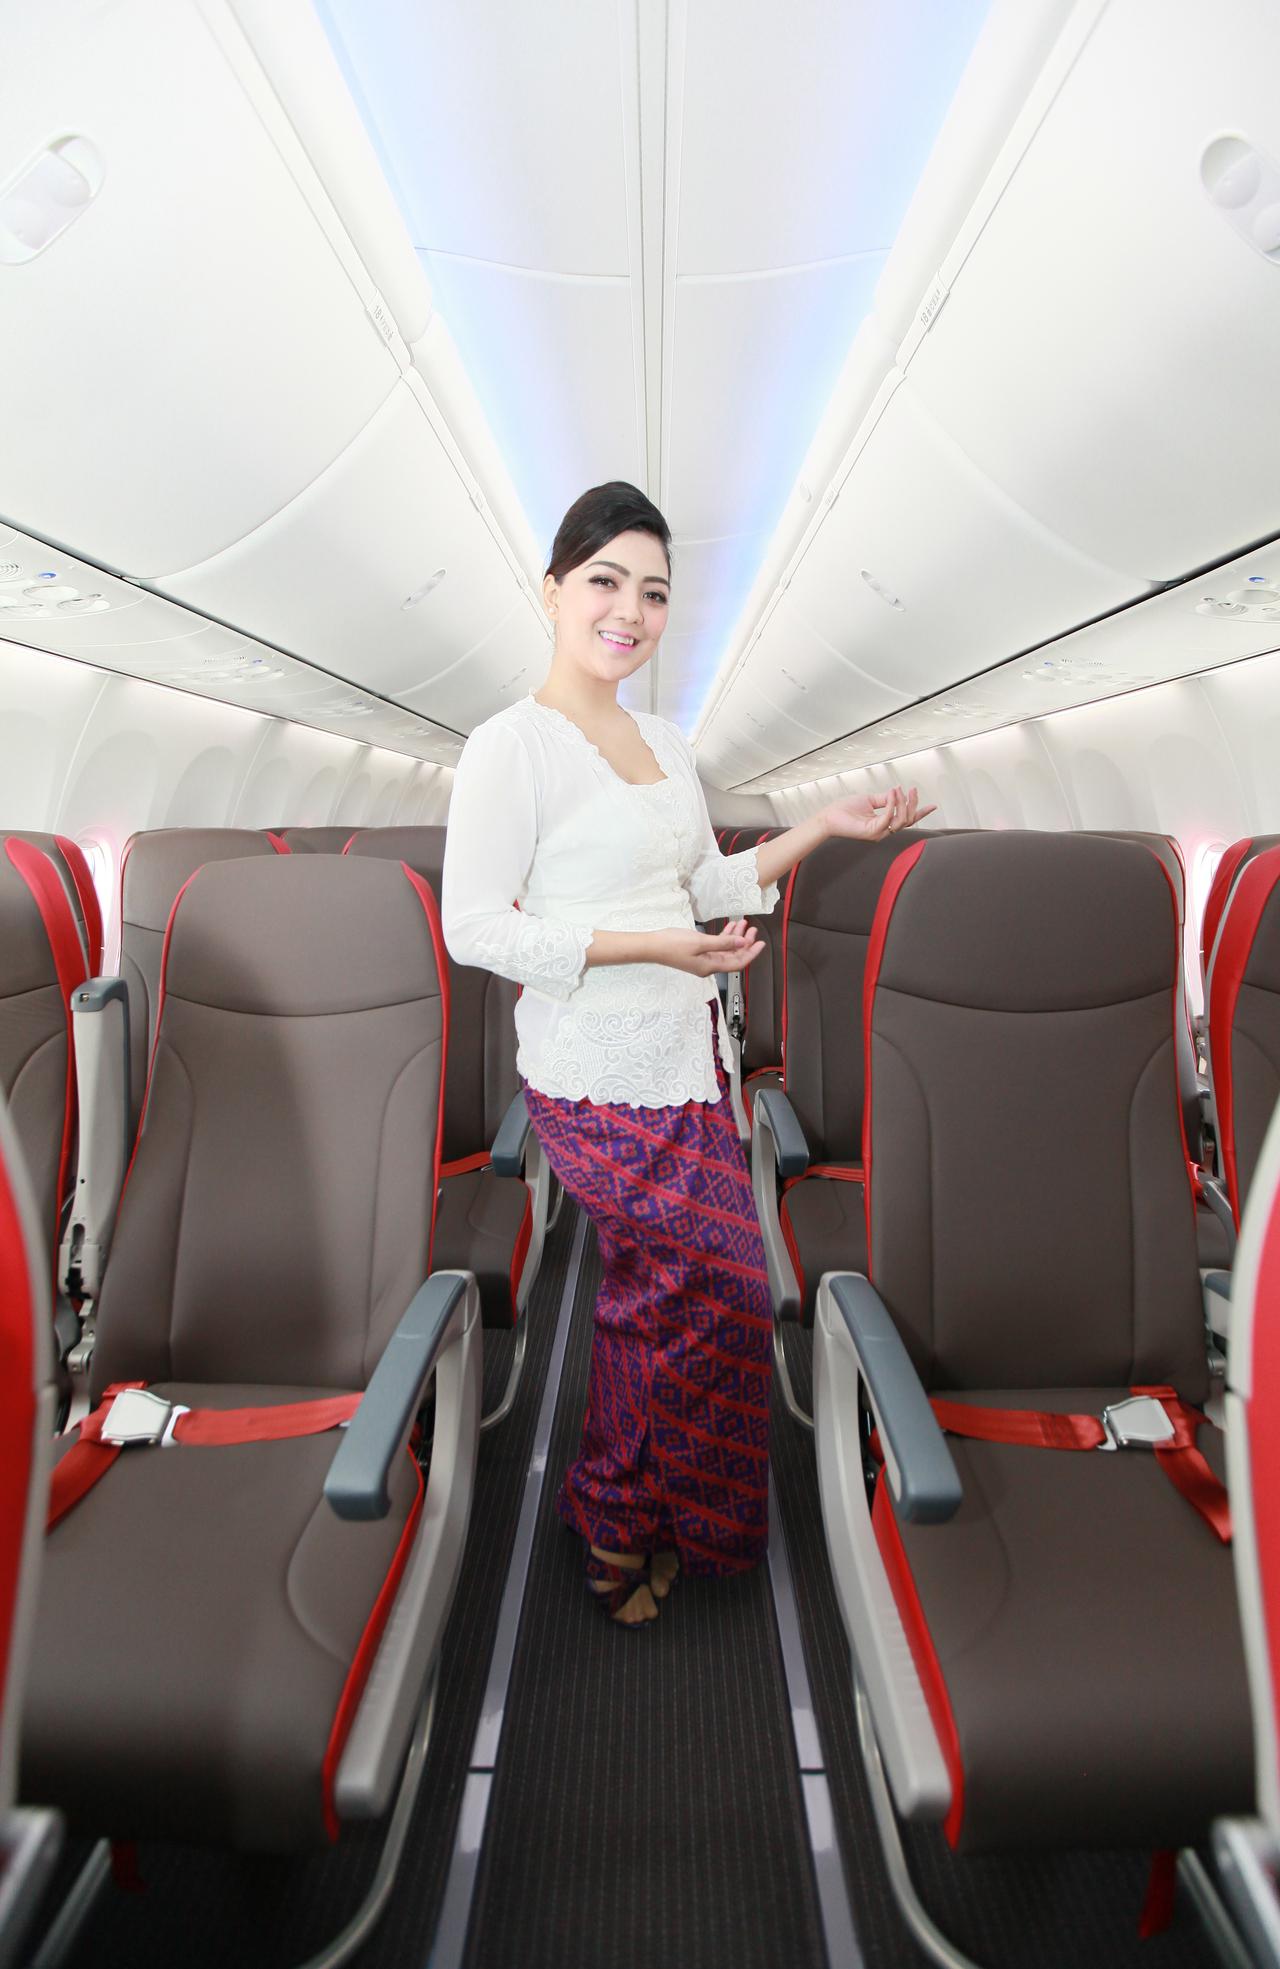 Flying Malindo Air: 6 things I learnt about travel with ...